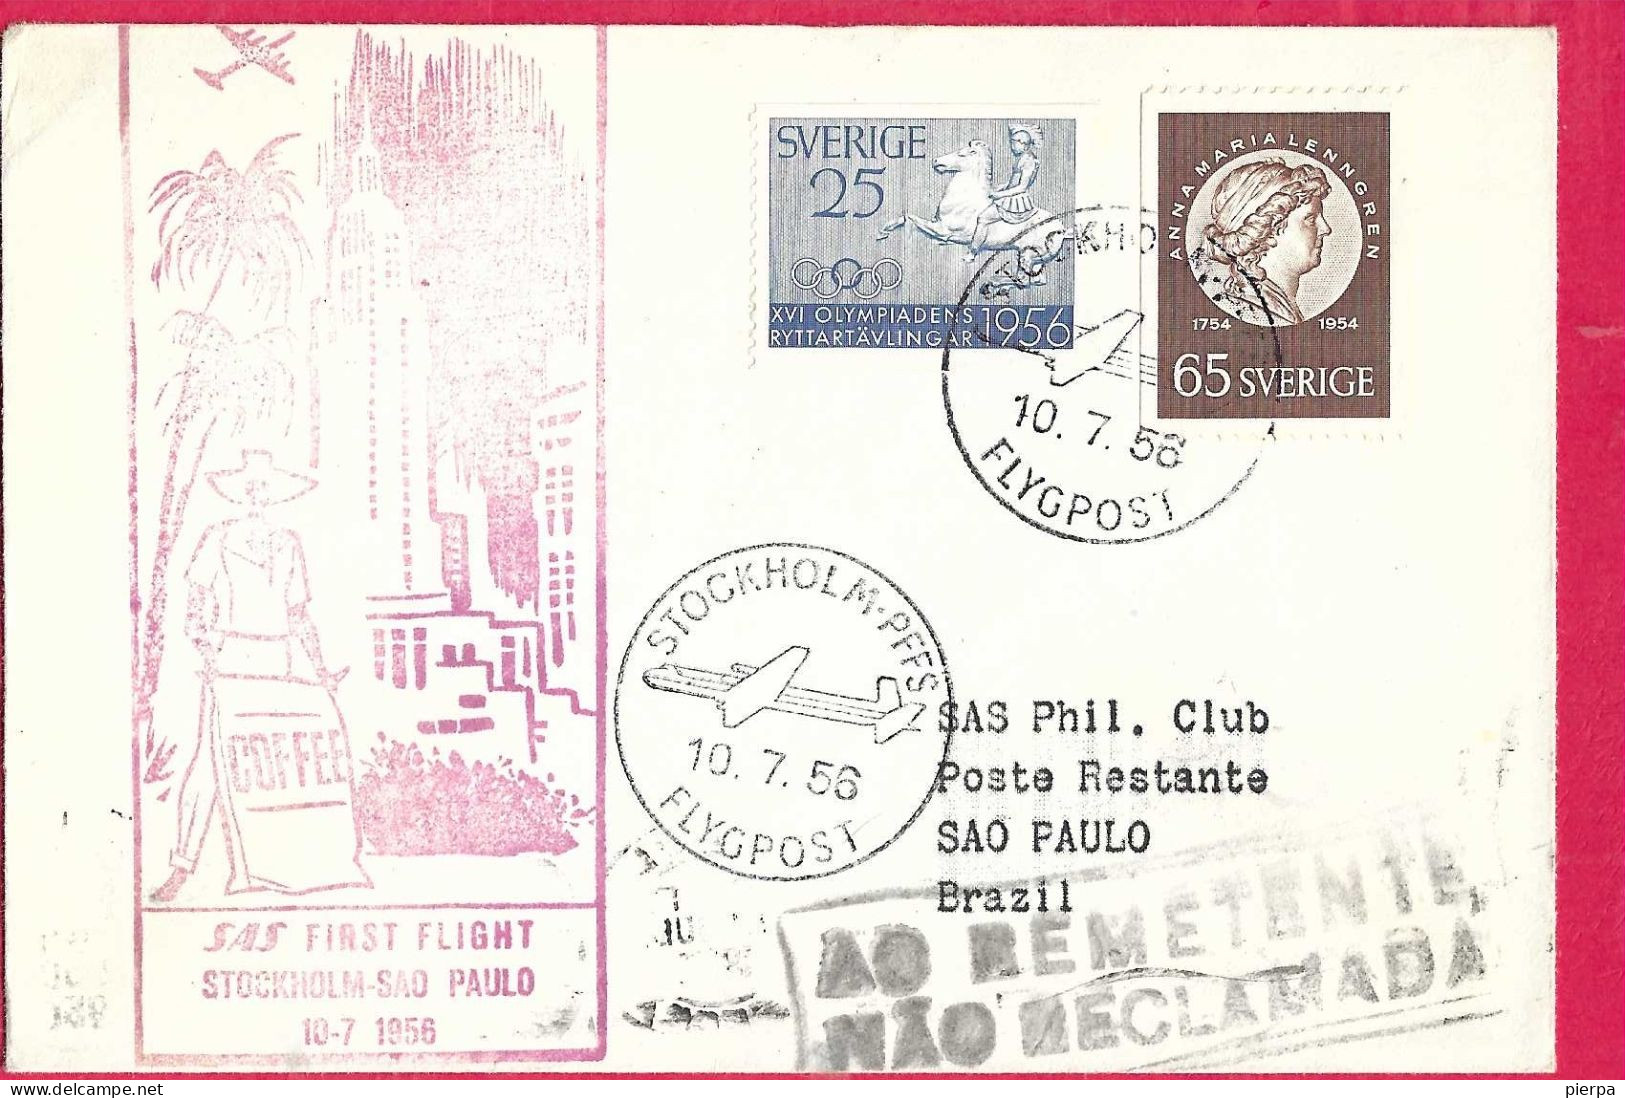 SVERIGE - FIRST FLIGHT SAS FROM STOCKHOLM TO SAO PAULO *10.7.56* ON OFFICIAL COVER - Brieven En Documenten